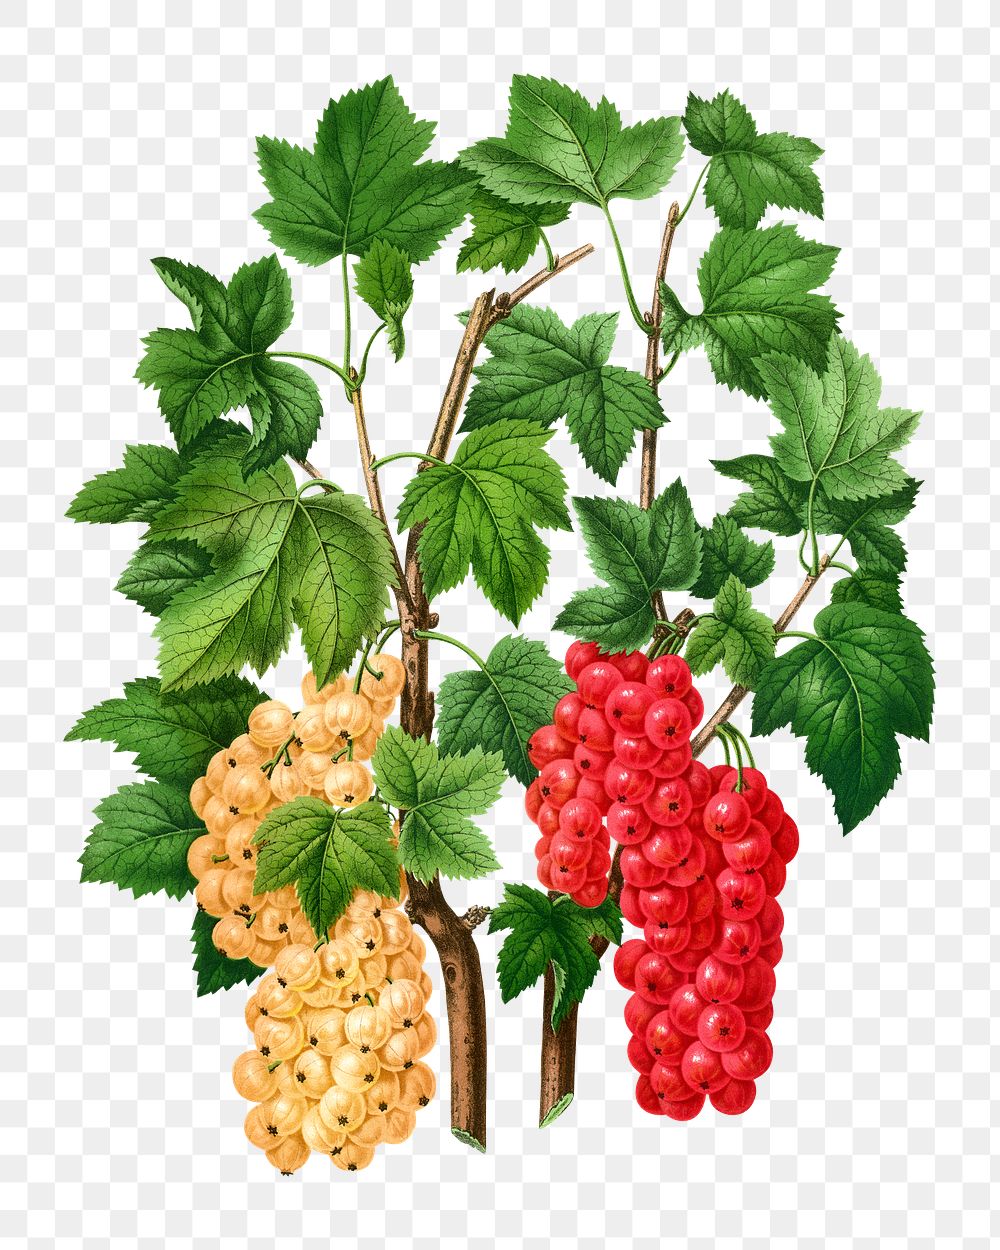 PNG vintage red currant illustration, transparent background. Remixed from our own original 1879 edition of Nederlandsche…